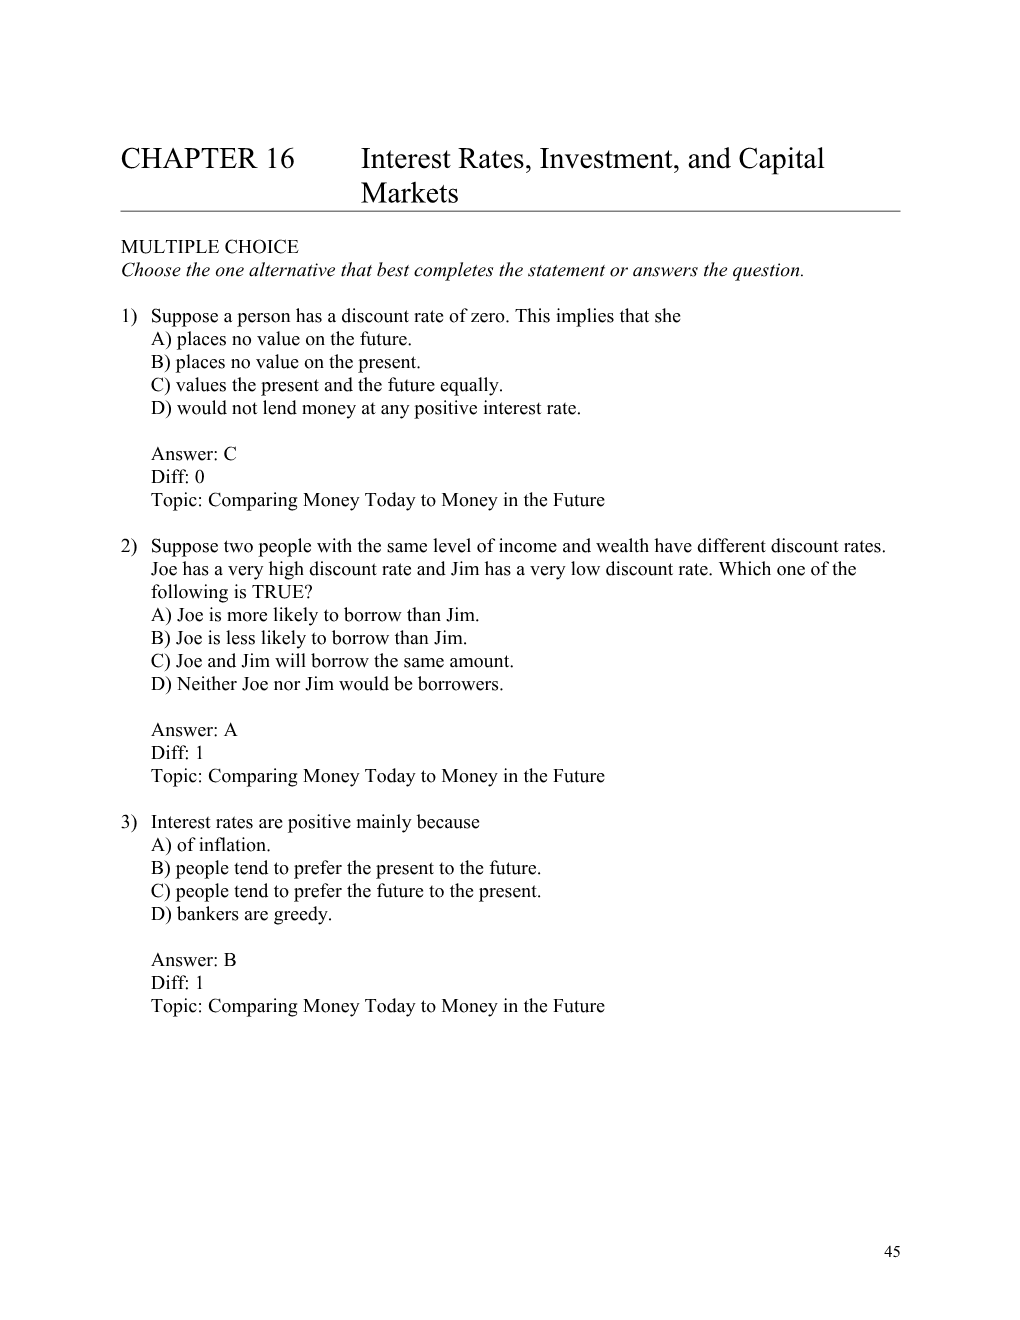 Chapter 16/Interest Rates, Investment, and Capital Markets